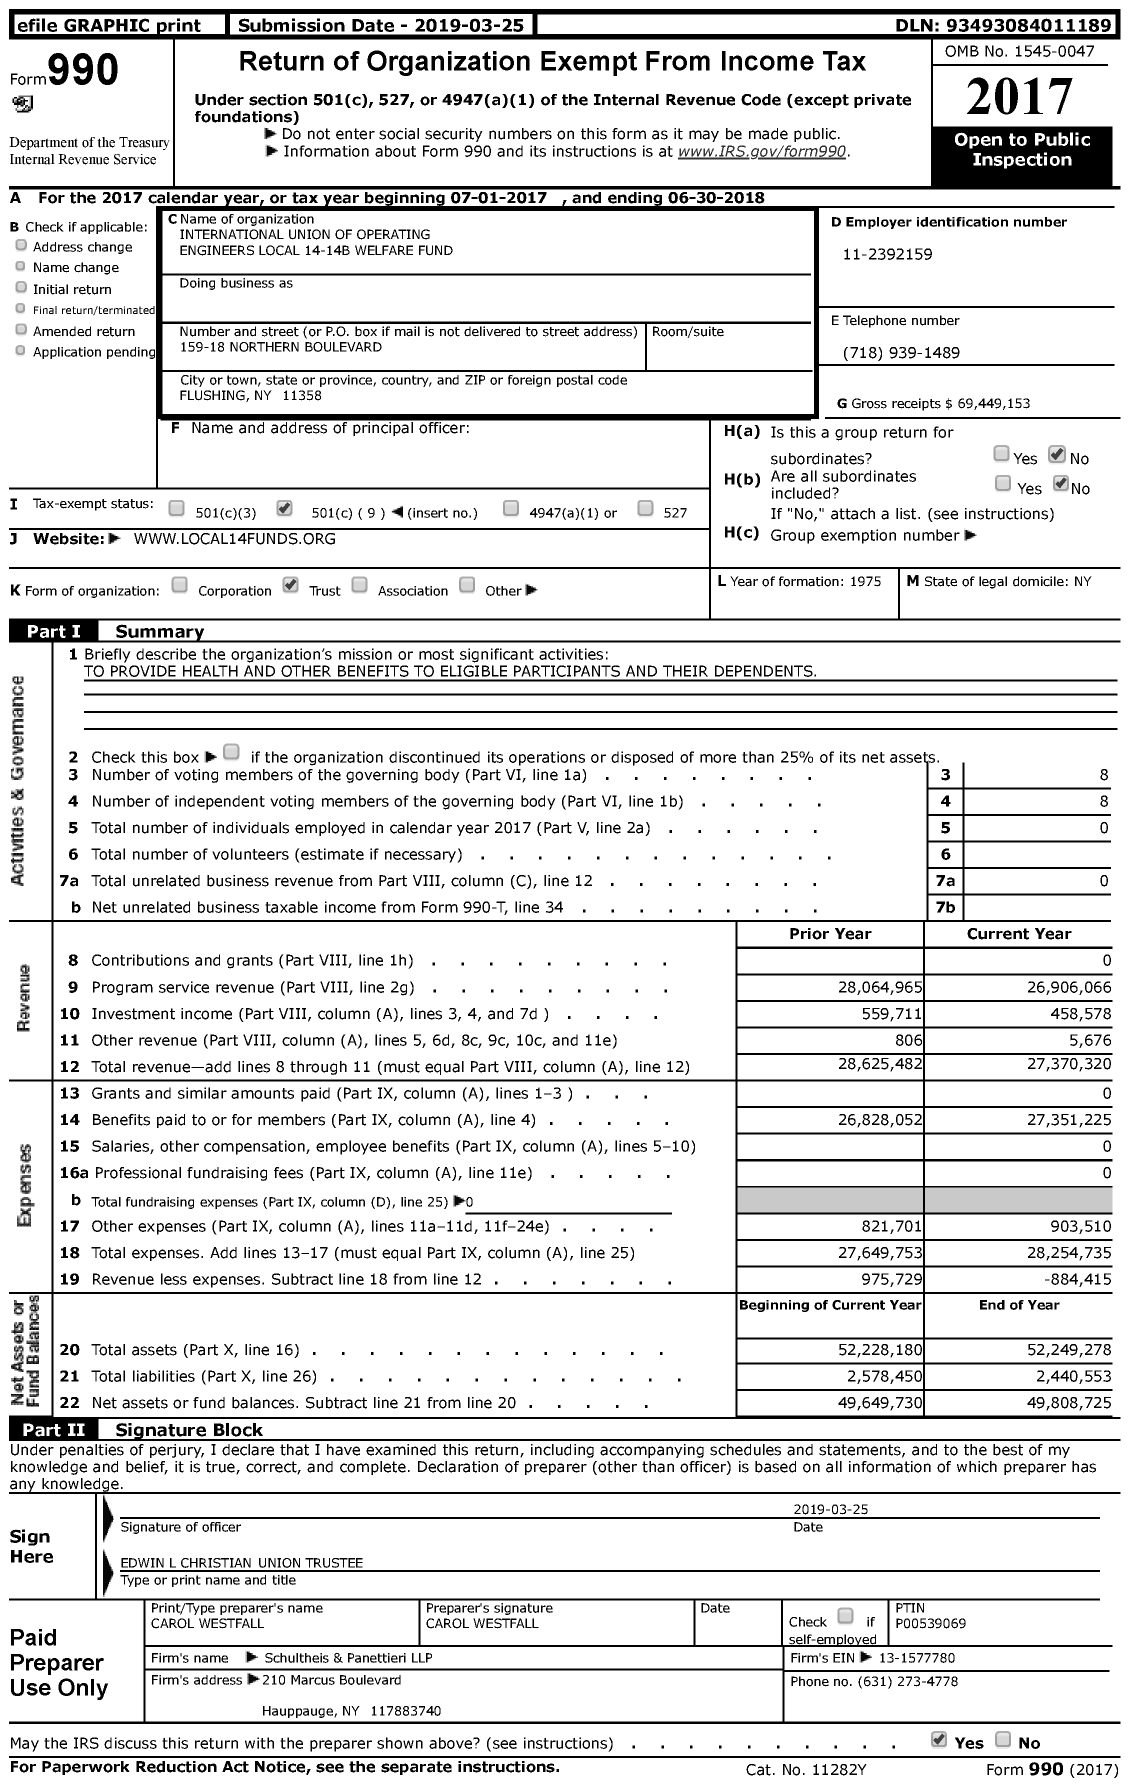 Image of first page of 2017 Form 990 for International Union of Operating Engineers Local 14-14b Welfare Fund